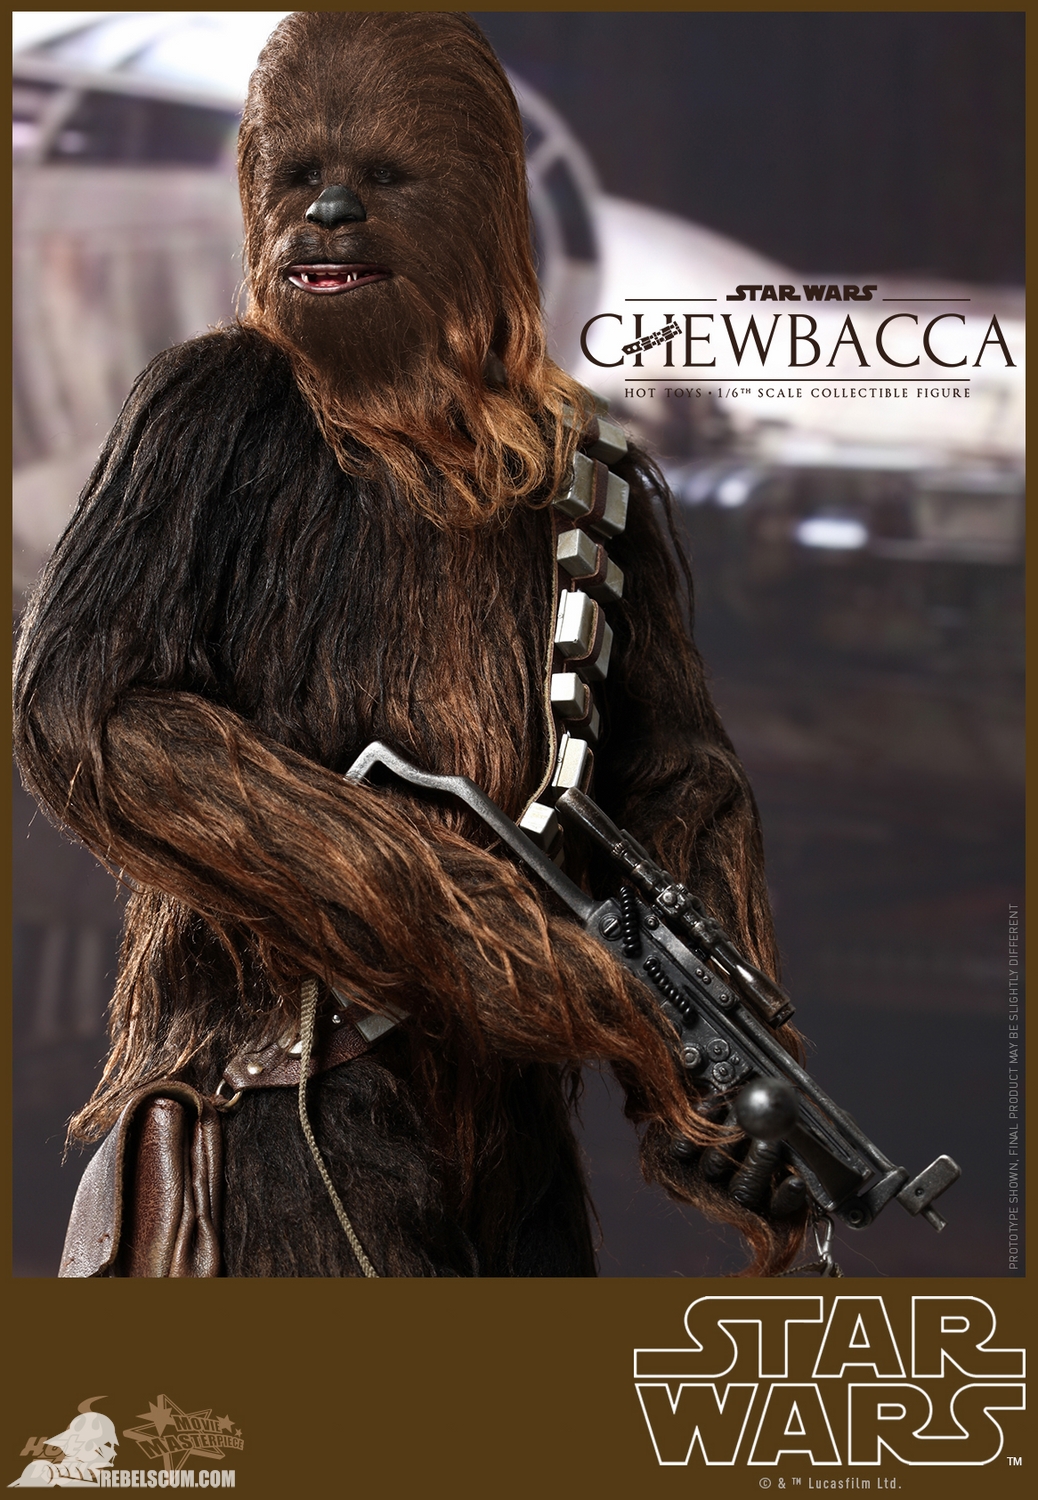 Hot-Toys-A-New-Hope-Chewbacca-Movie-Masterpiece-Series-012.jpg